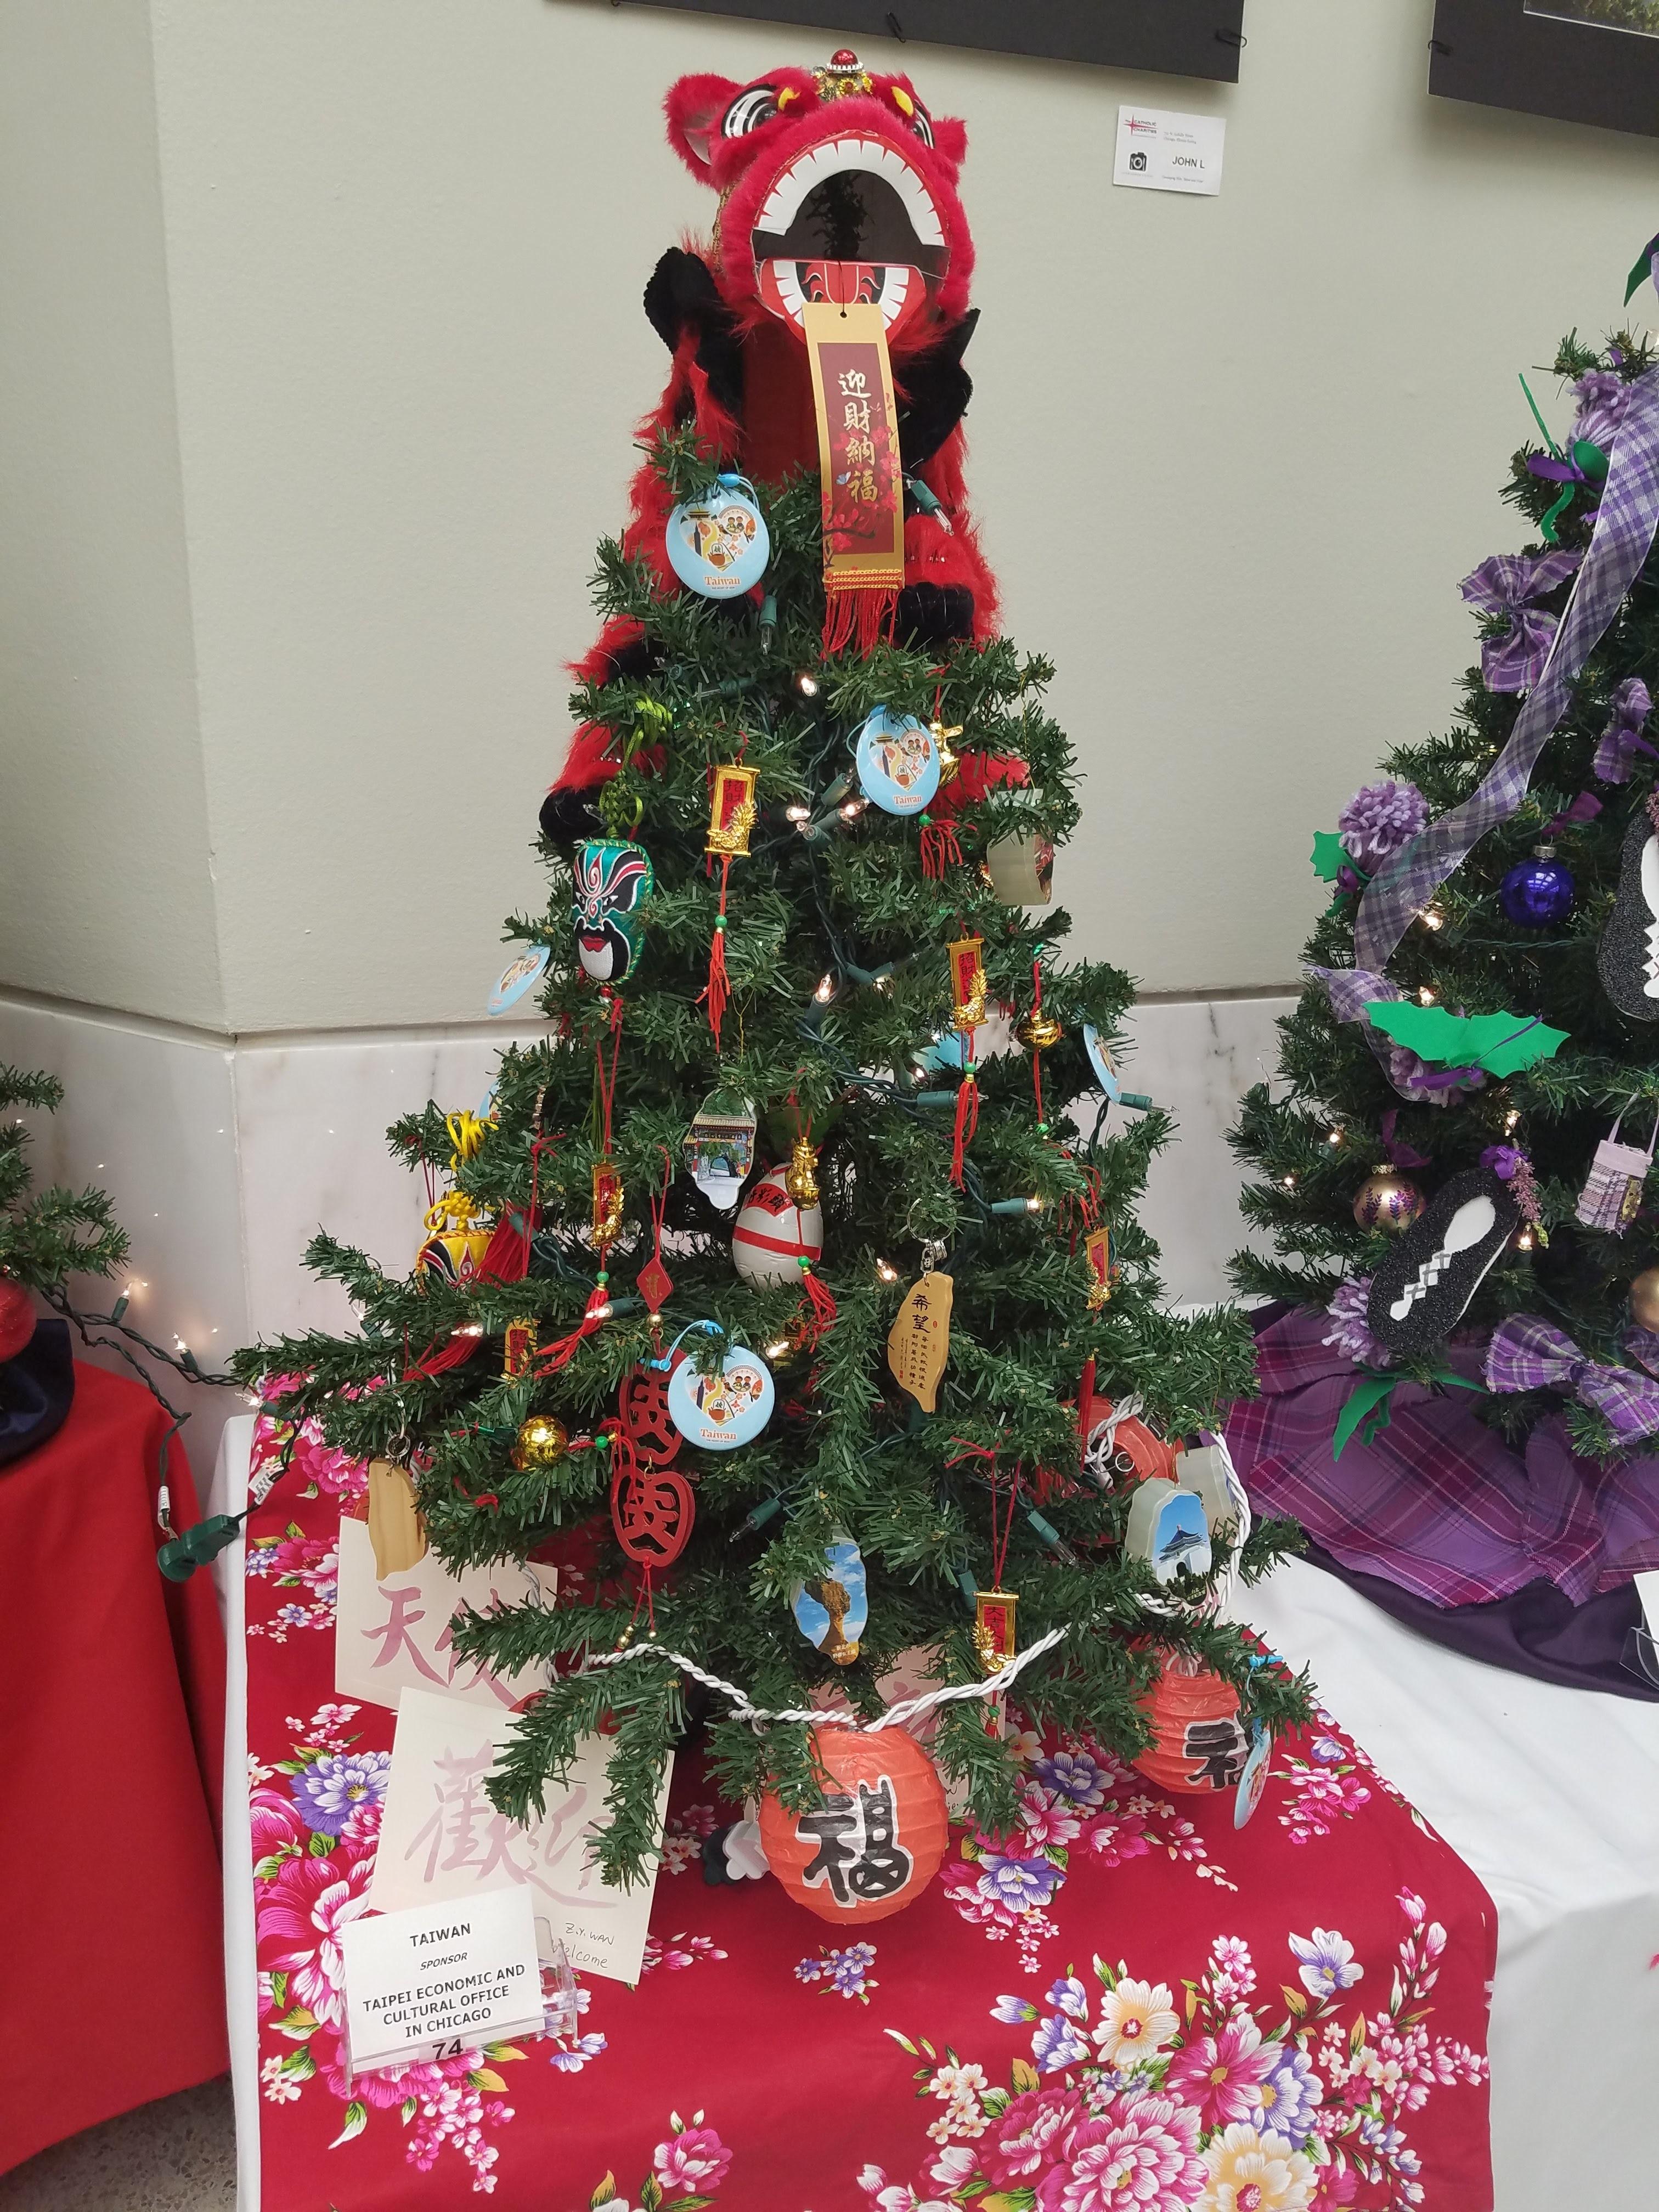 A Christmas tree decorated by TECO in Chicago in Taiwanese ornaments to wish every Chicagoan a Merry Christmas.